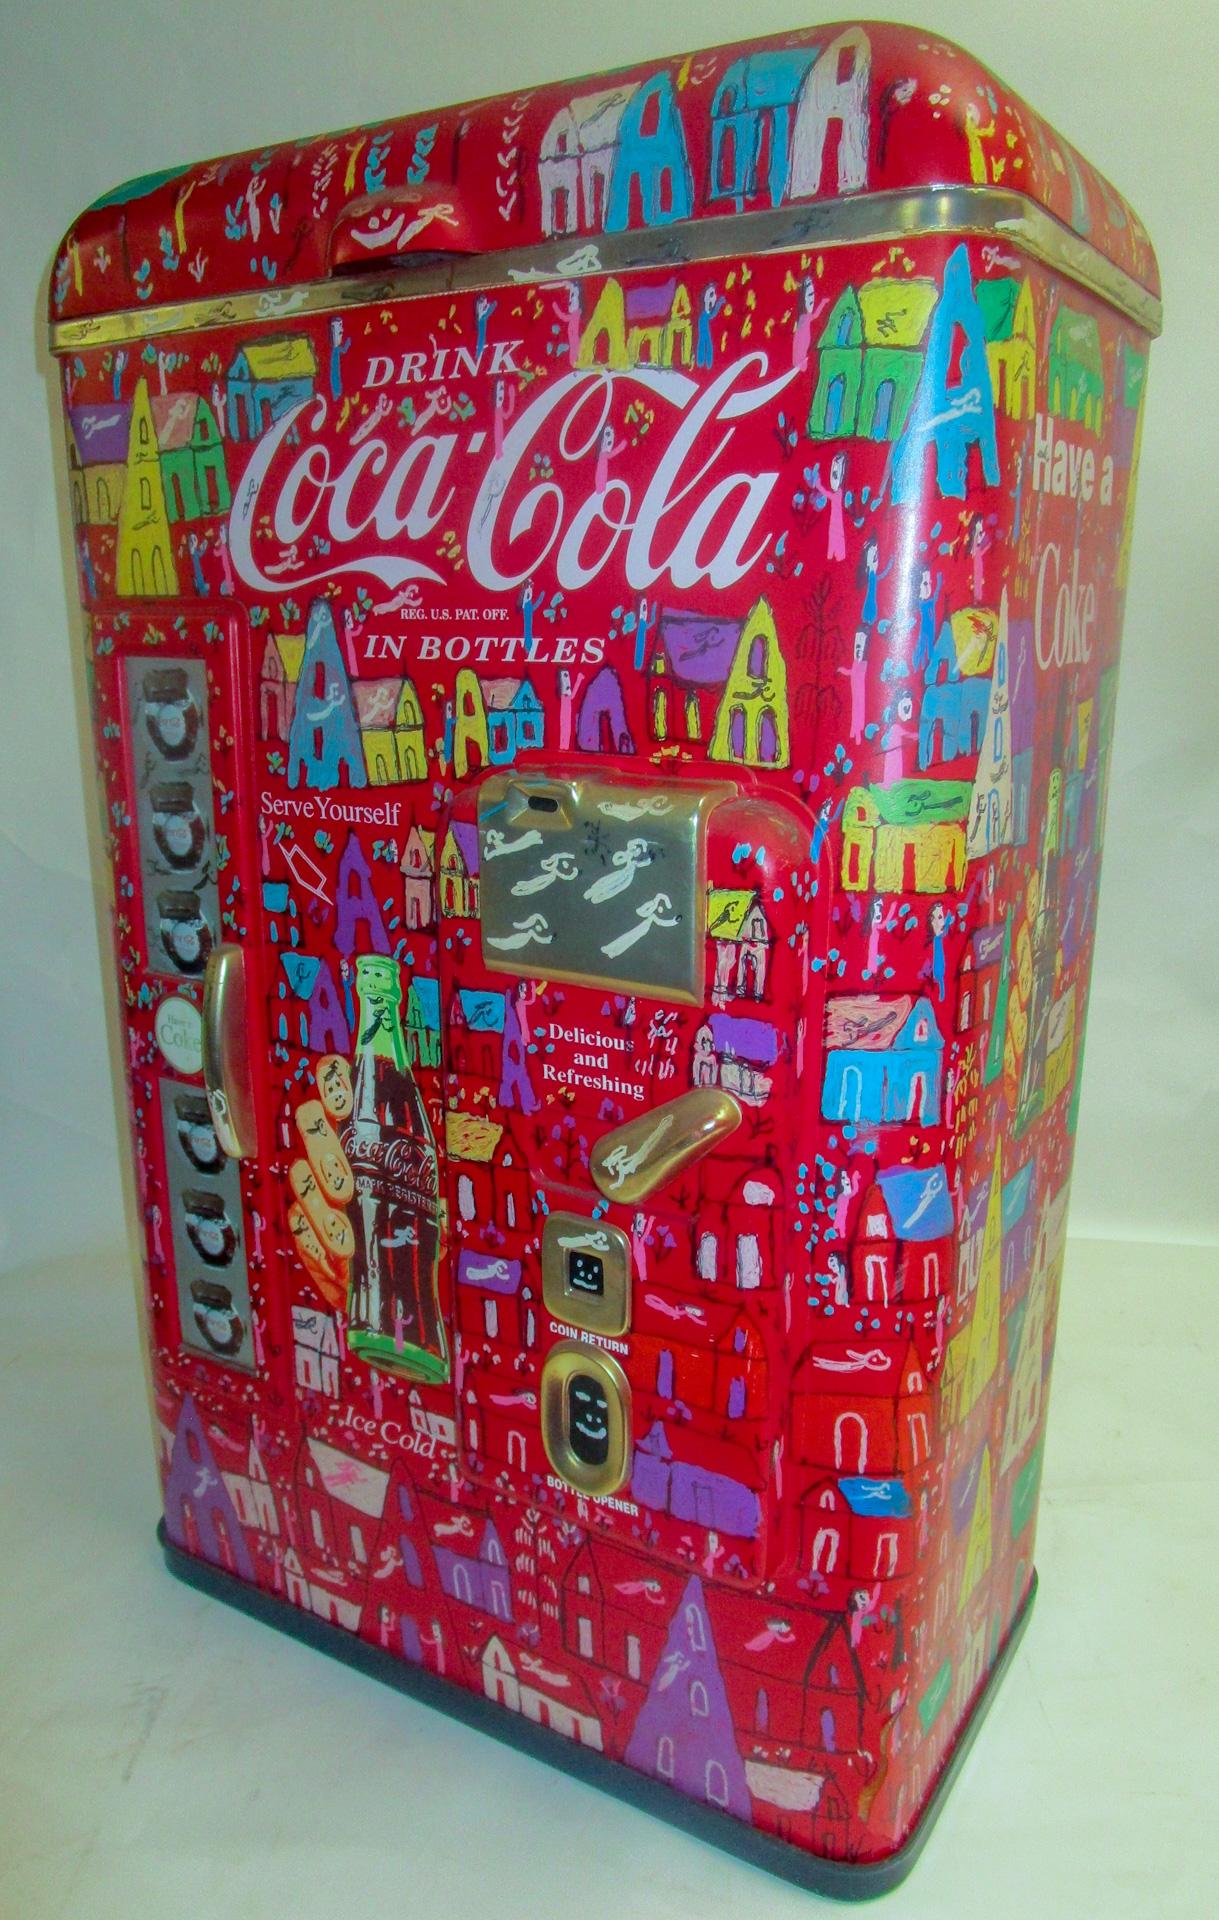 Vintage Retro Nostalgia Coke Cooler designed in 1992 by Paul Flum Ideas Inc. and painted with acrylic and permanent marker by folk artist Howard Finster (1917-2001) for one of his Paradise Garden parties. Very colorfully embellished on all four